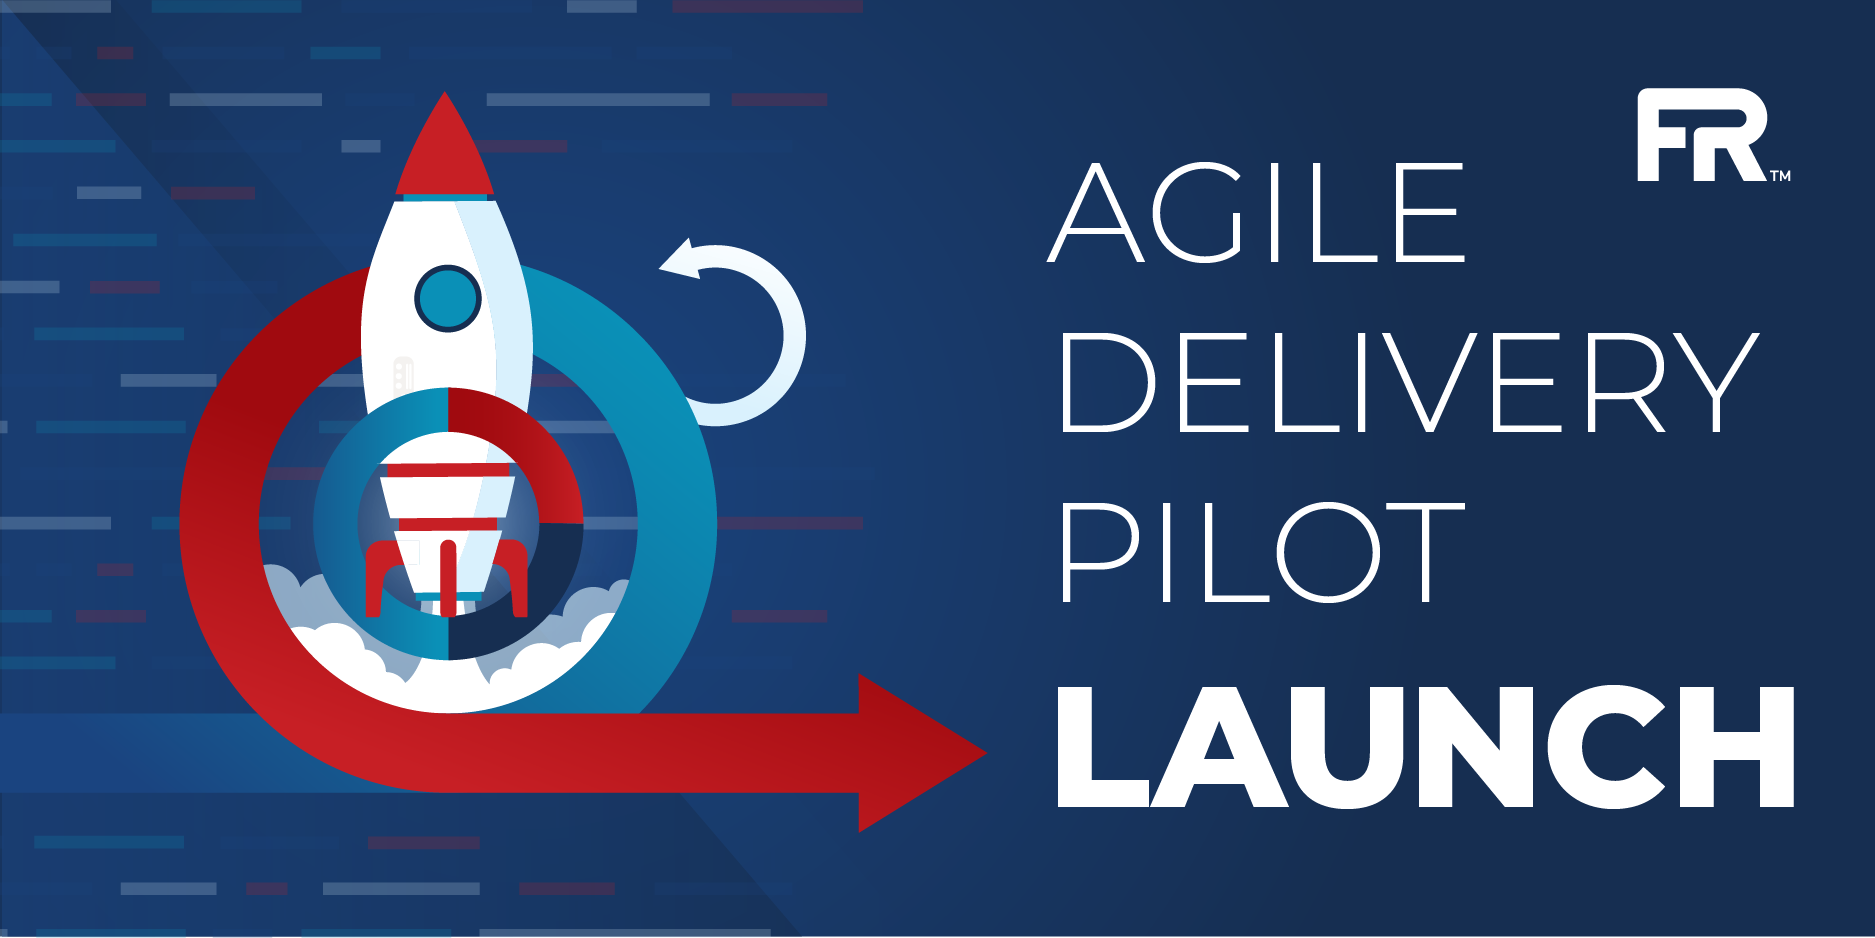 The FedRAMP Agile Delivery Pilot